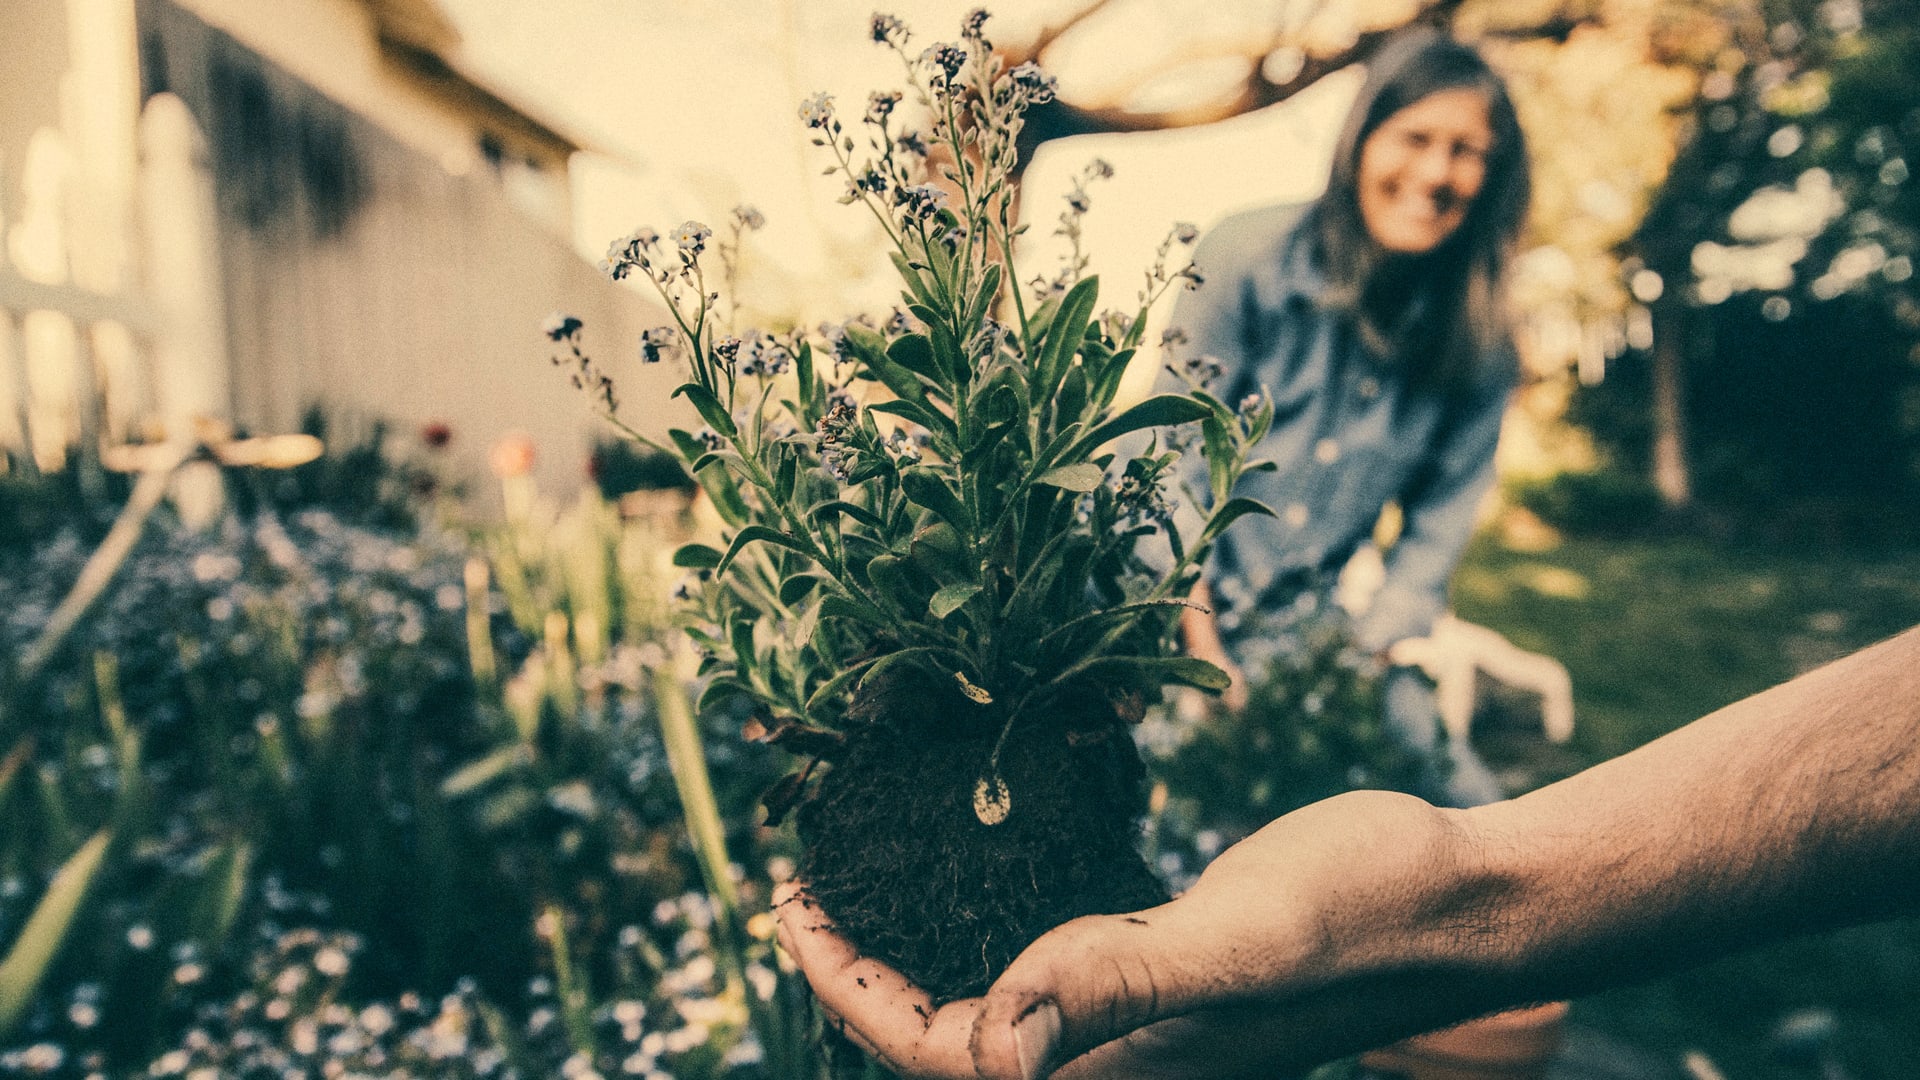 Princeton researchers discover that home gardening is basically the answer to society’s ills